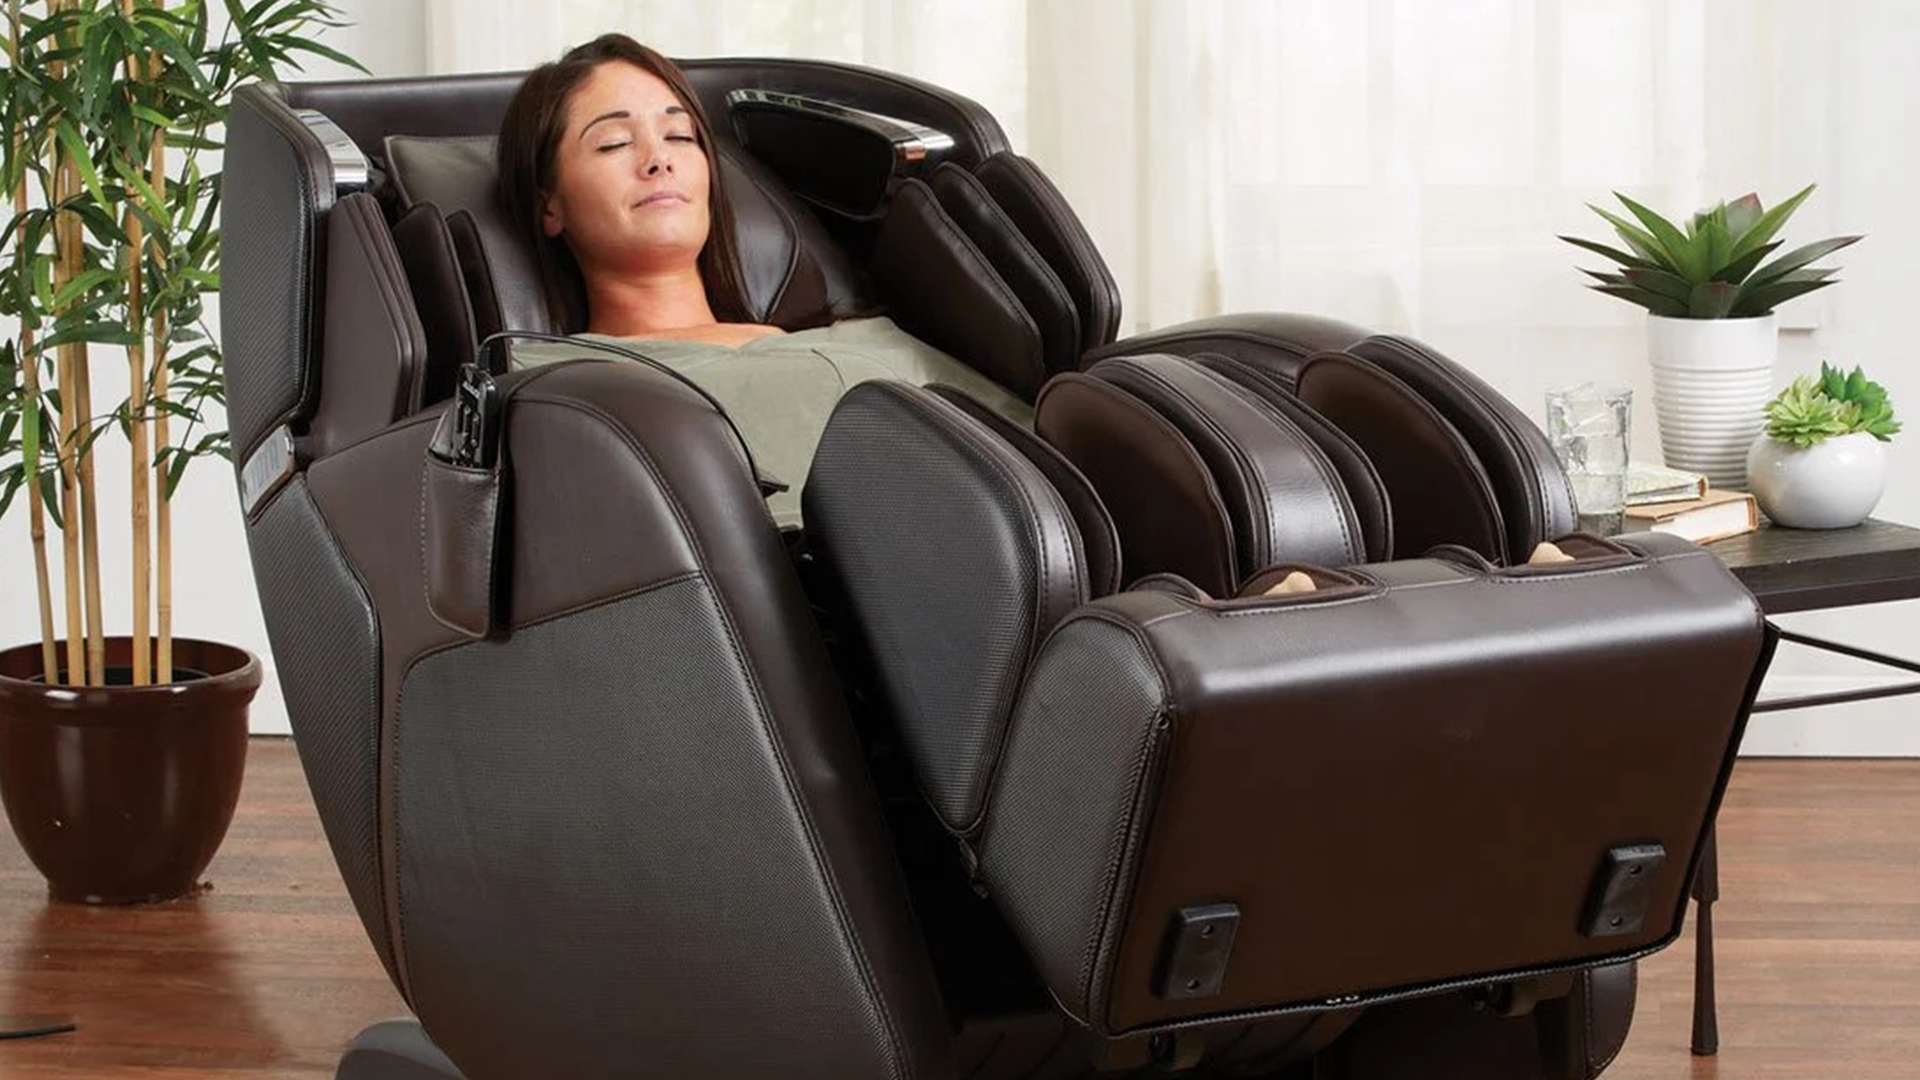 using a massage chair every day offers consistent relief from muscle tension, stress, and discomfort in women